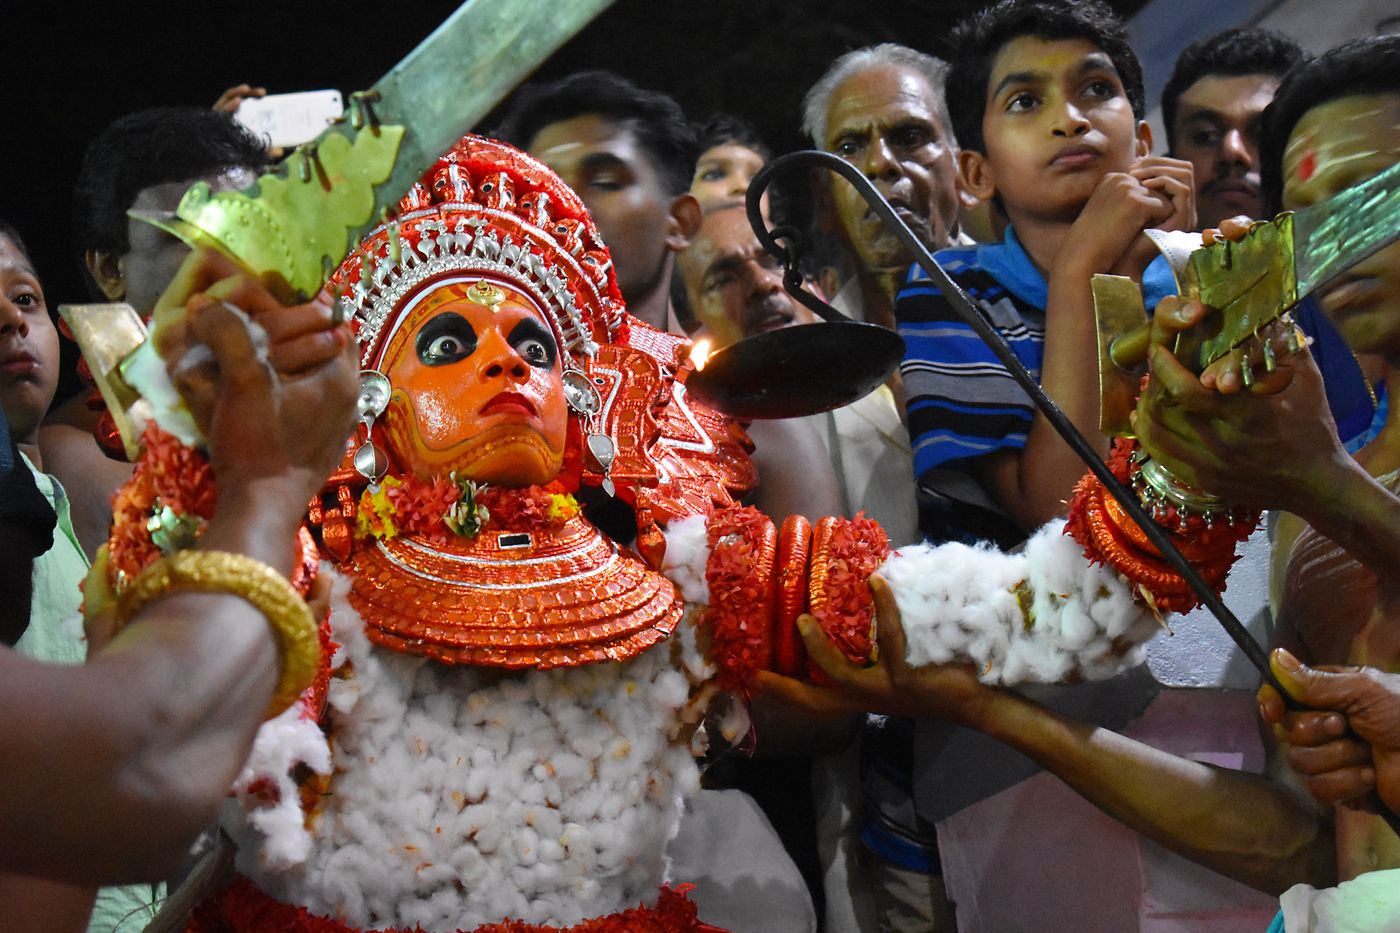 A Theyyam artist performs during the annual festival at Puliroopakaali temple in Ramapuram. Theyyam is a ritualistic folkart form of Kerala 